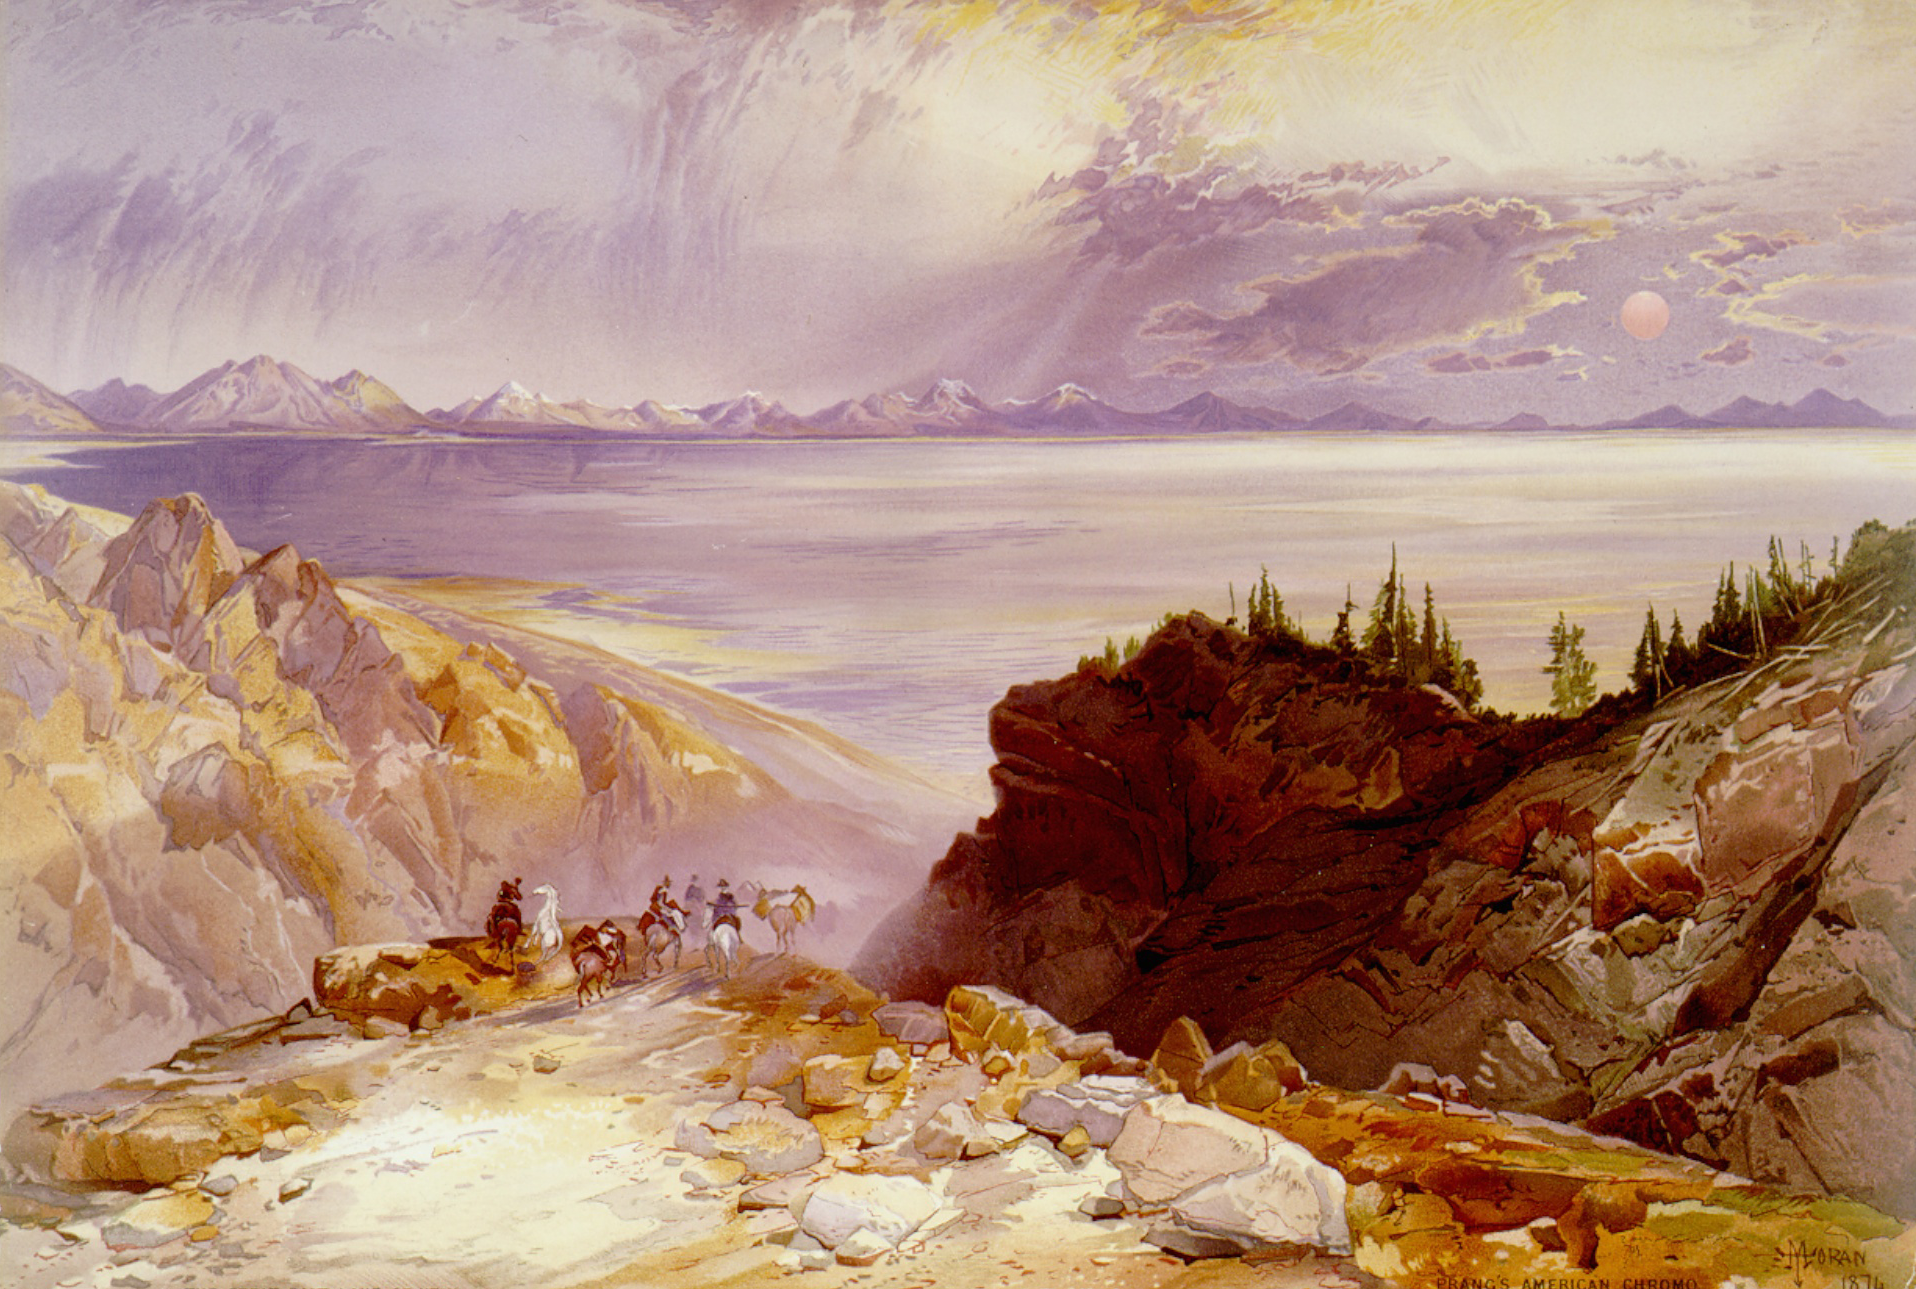 "The Great Salt Lake of Utah" painting by Thomas Moran in 1875. The painting features several people on horses, riding onto the beach of the Great Salt Lake.